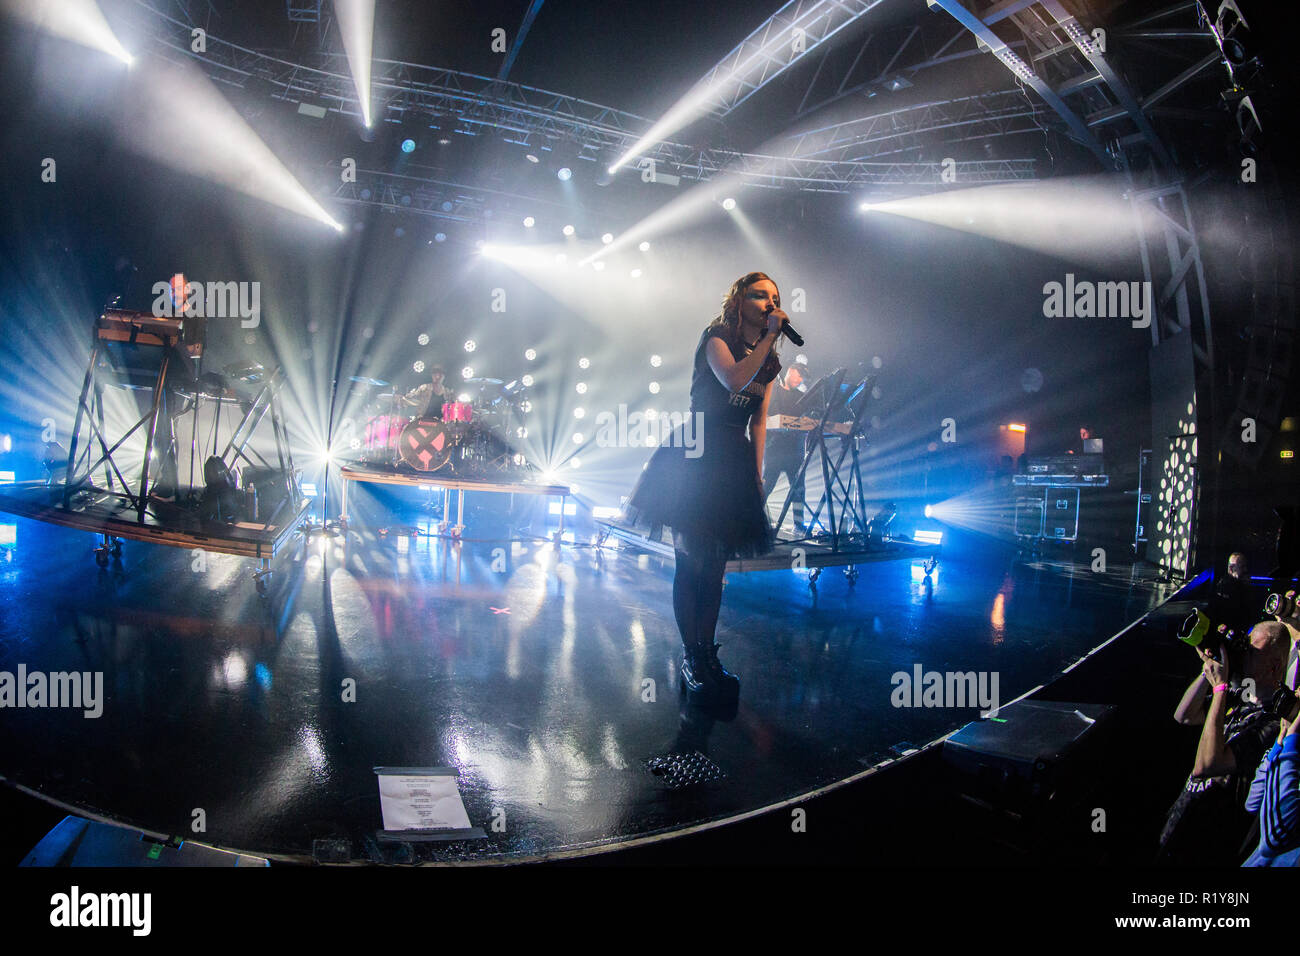 Milan, Italy. 14th November 2018. The Scottish synth-pop band CHVRCHES performs live on stage at Fabrique to present their new album 'Love Is Dead' Credit: Rodolfo Sassano/Alamy Live News Stock Photo